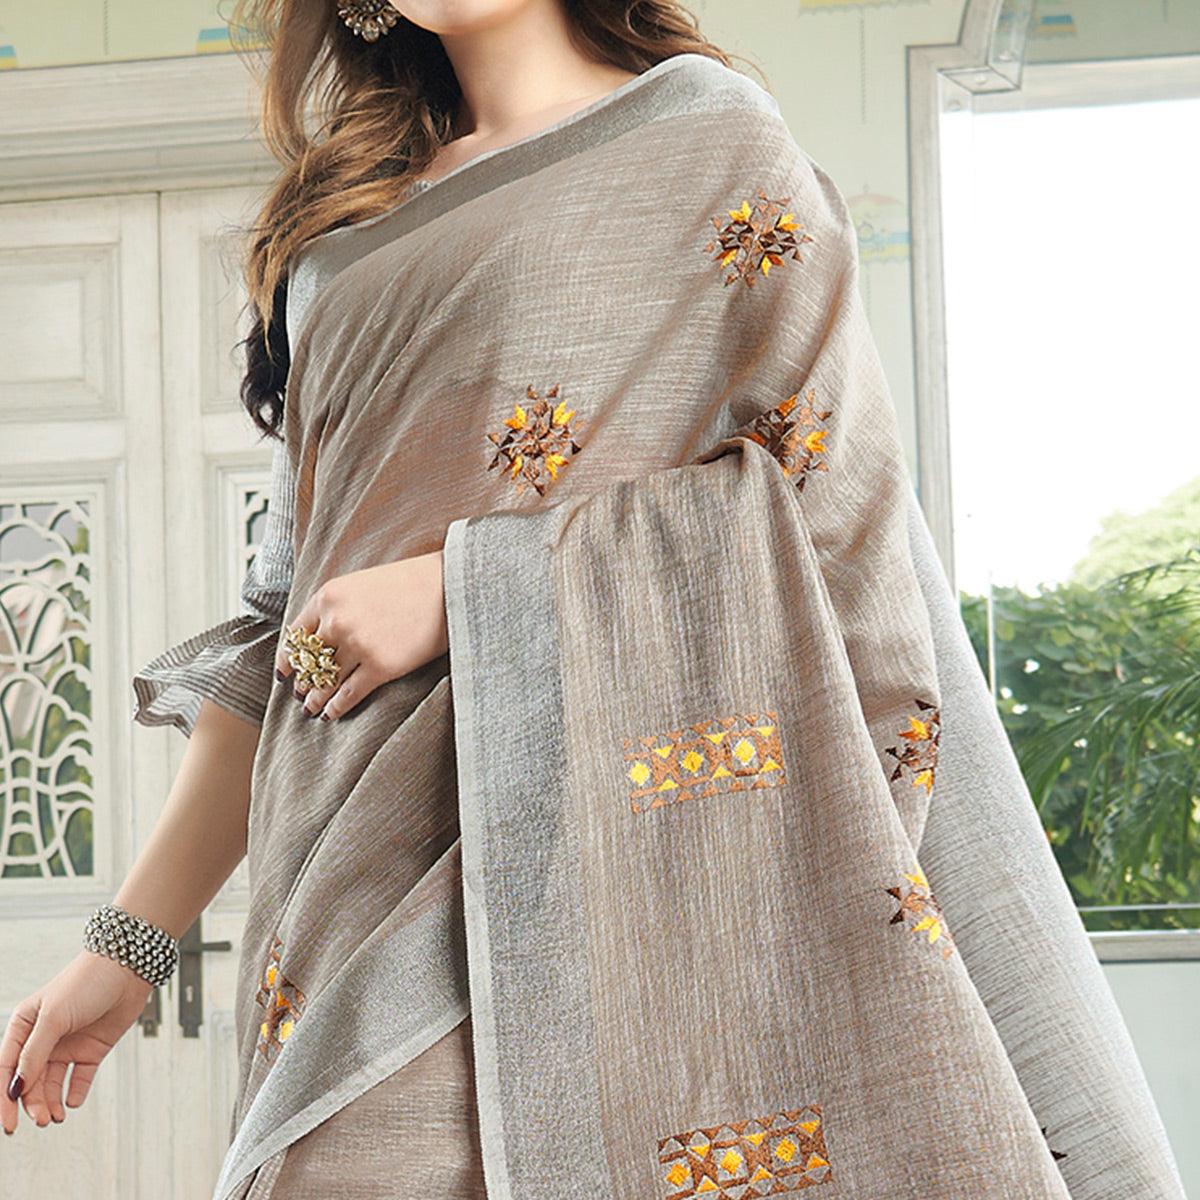 Classy Pastel Brown Colored Casual Wear Floral Embroidered Linen-Cotton Saree With Tassels - Peachmode